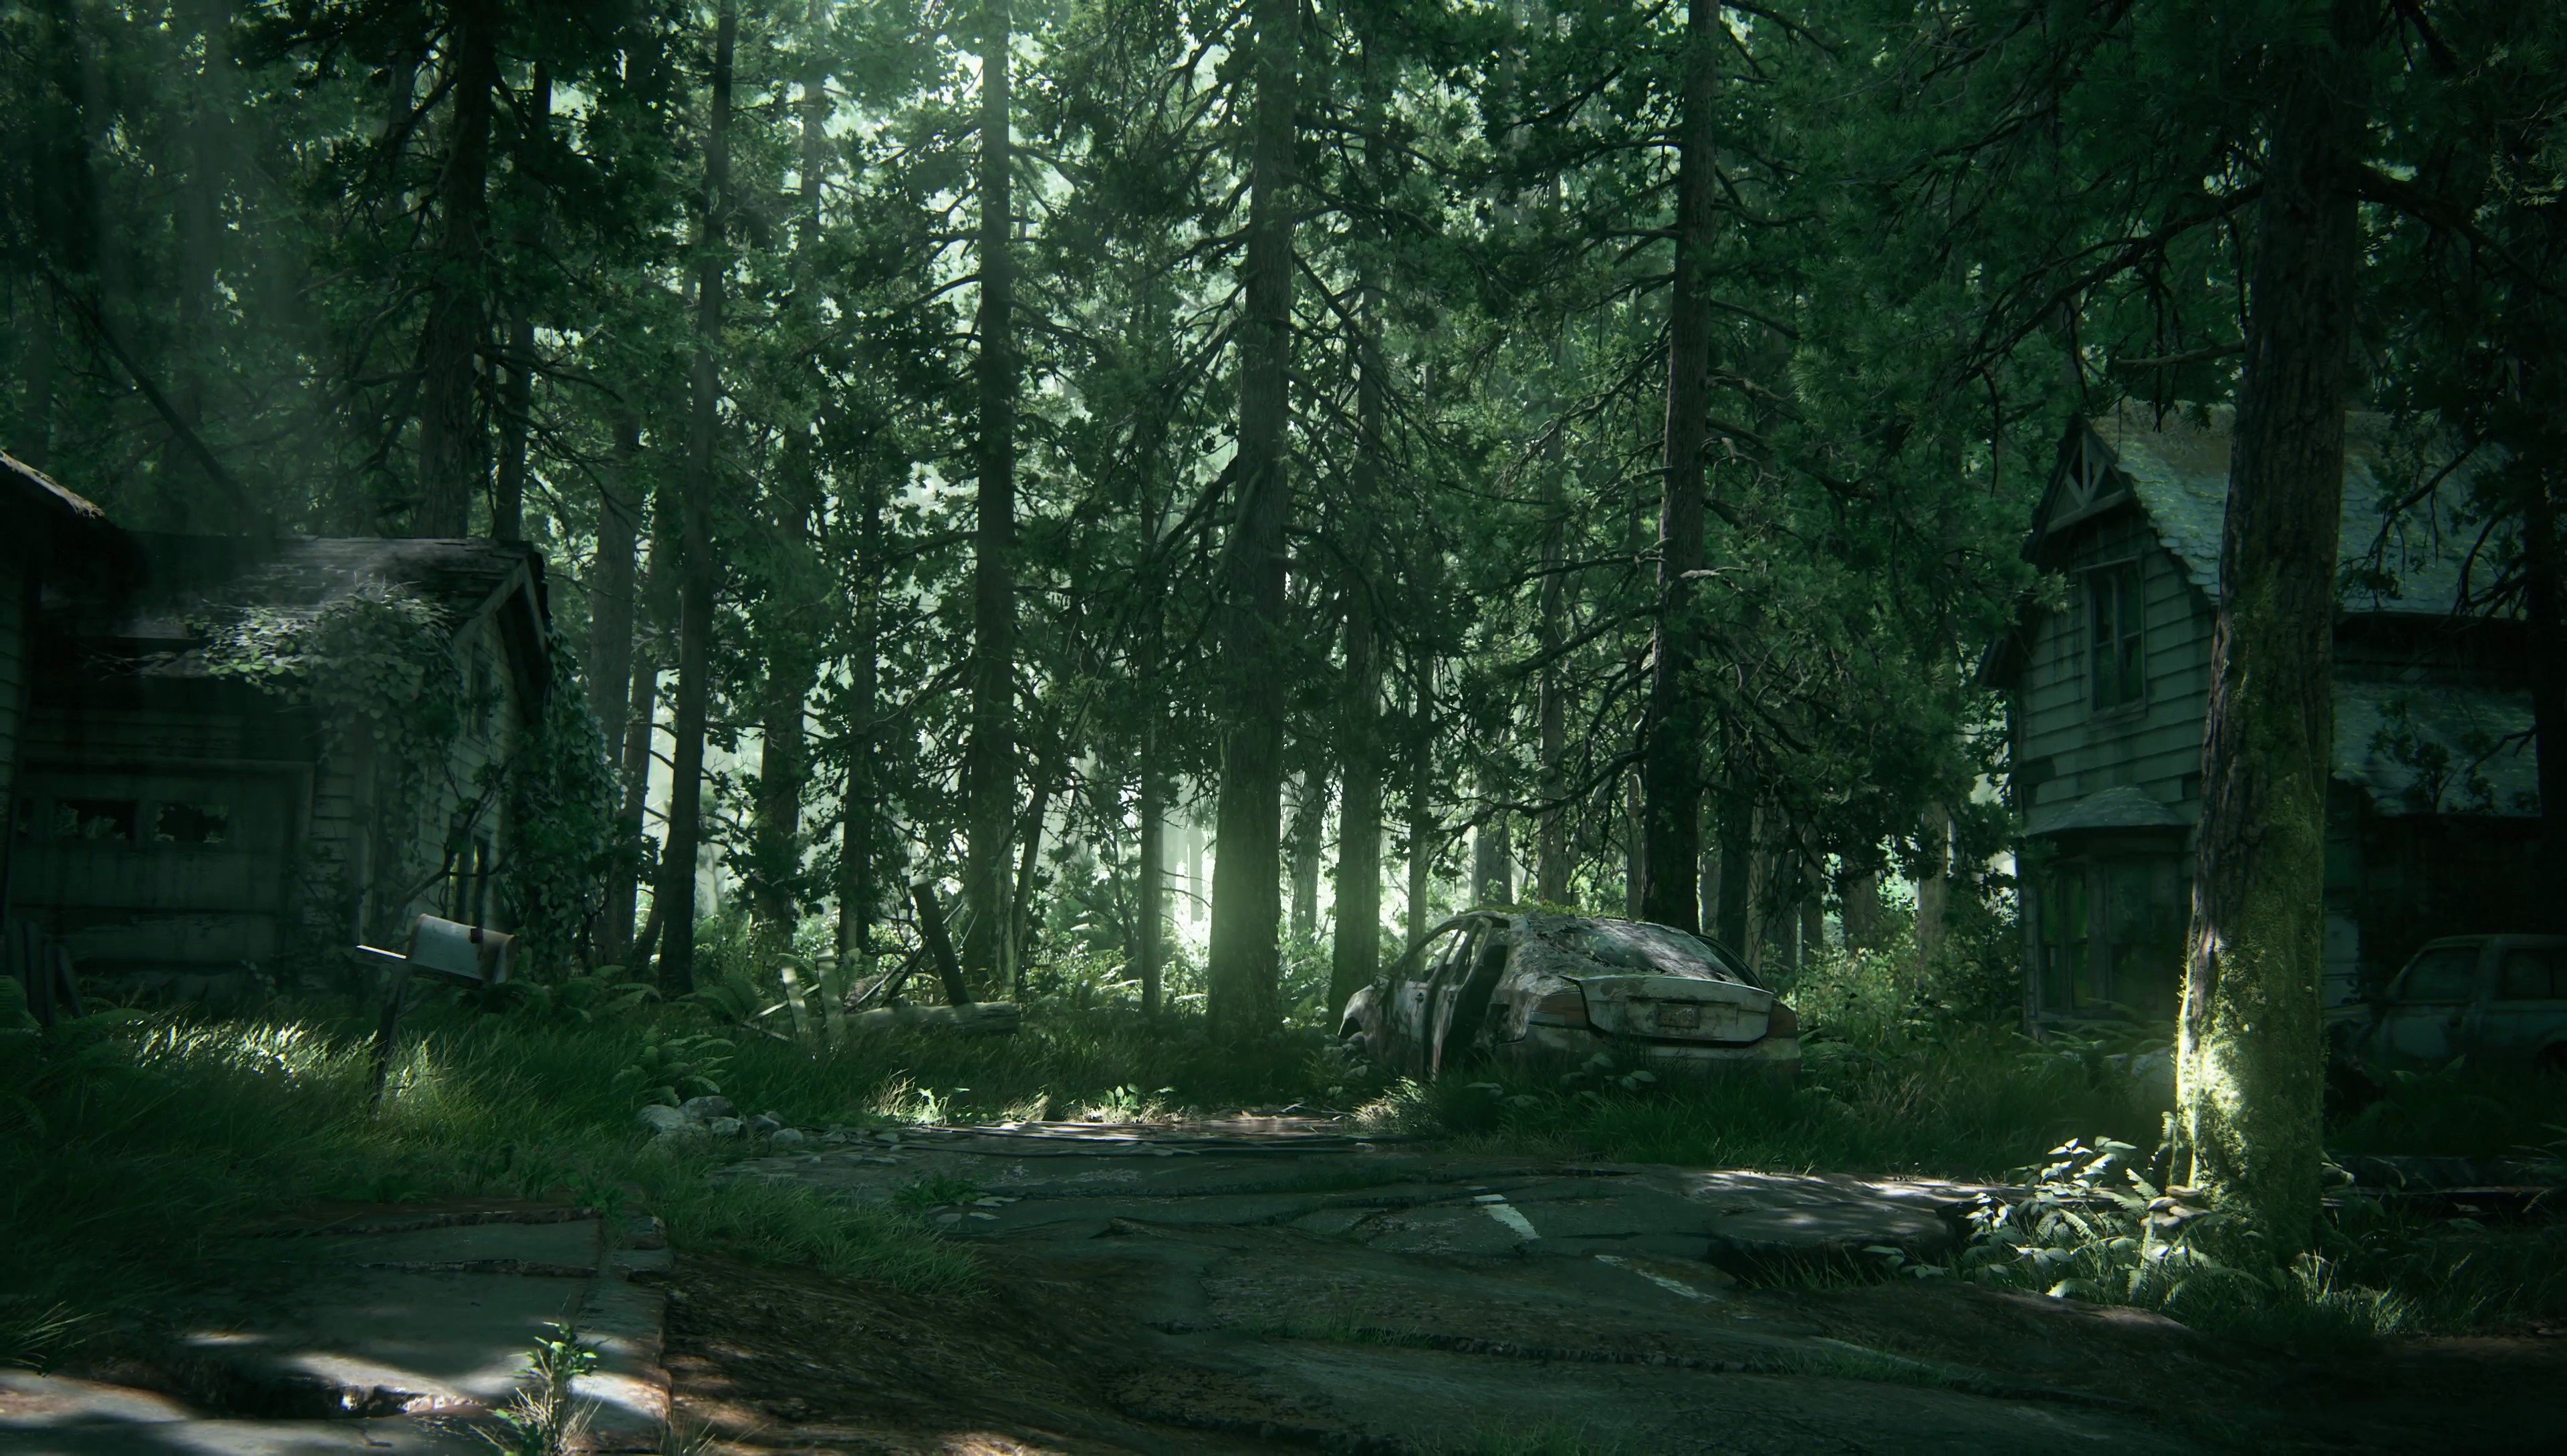 Ellie, Joel, The Last of Us, Part II, Apocalyptic, Video games, Forest Wallpaper